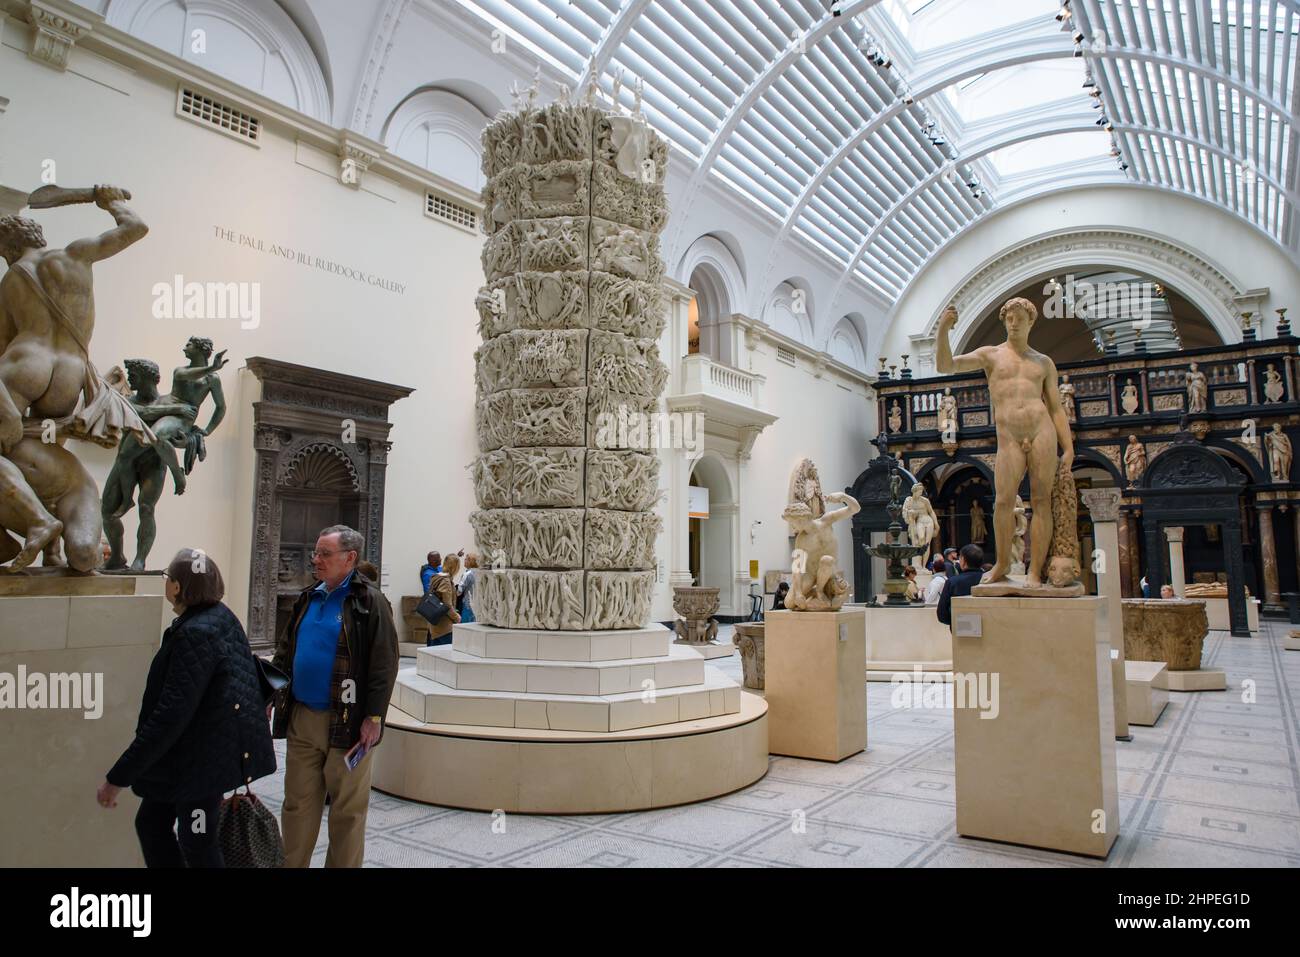 People watching exhibition at British Museum in London, United Kingdom Stock Photo